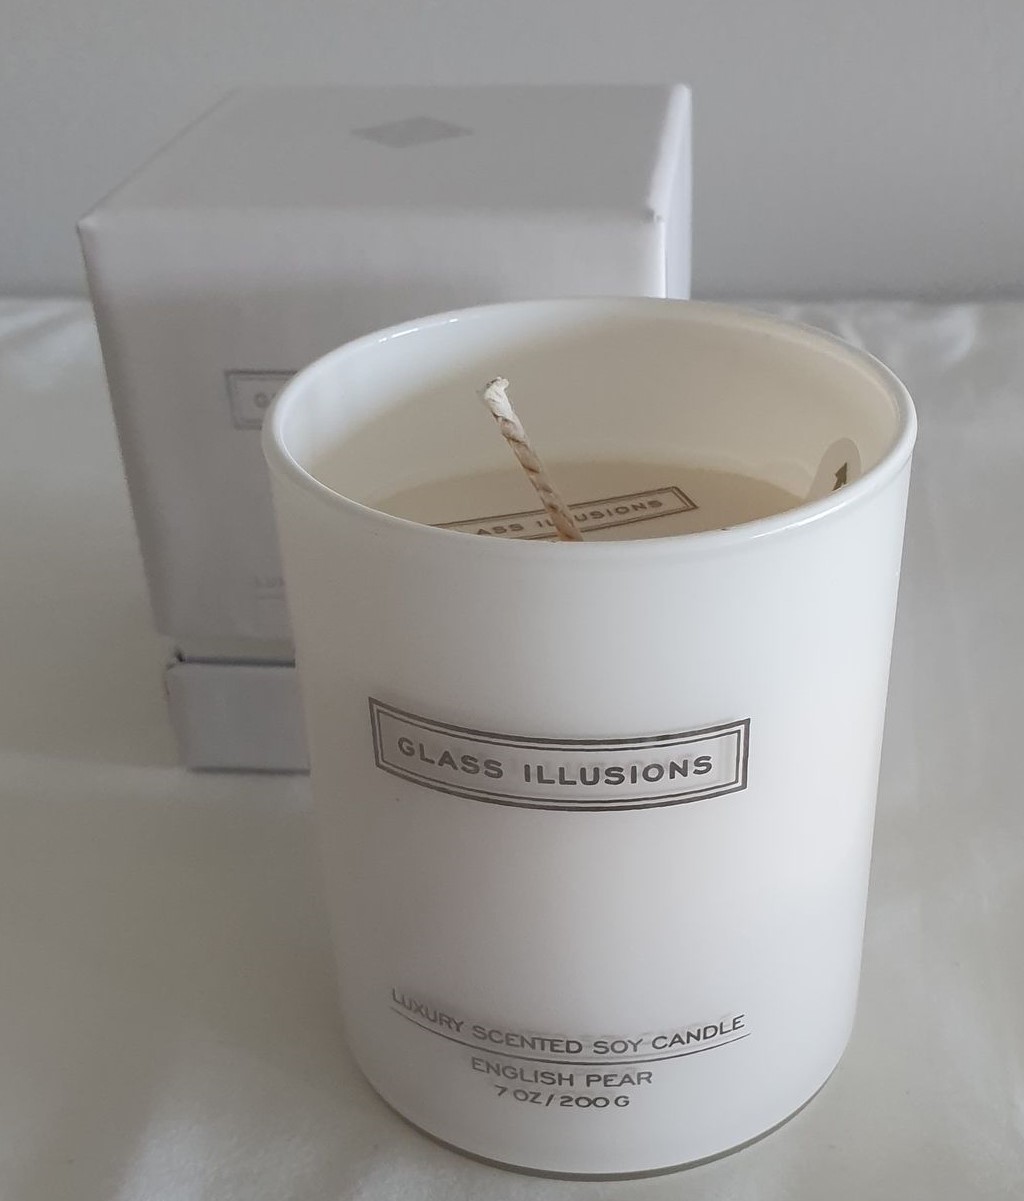 Thumbnail for CL8004WS Med Tumbler 7oz White Glass Soy Wax English Pear Gift Boxed